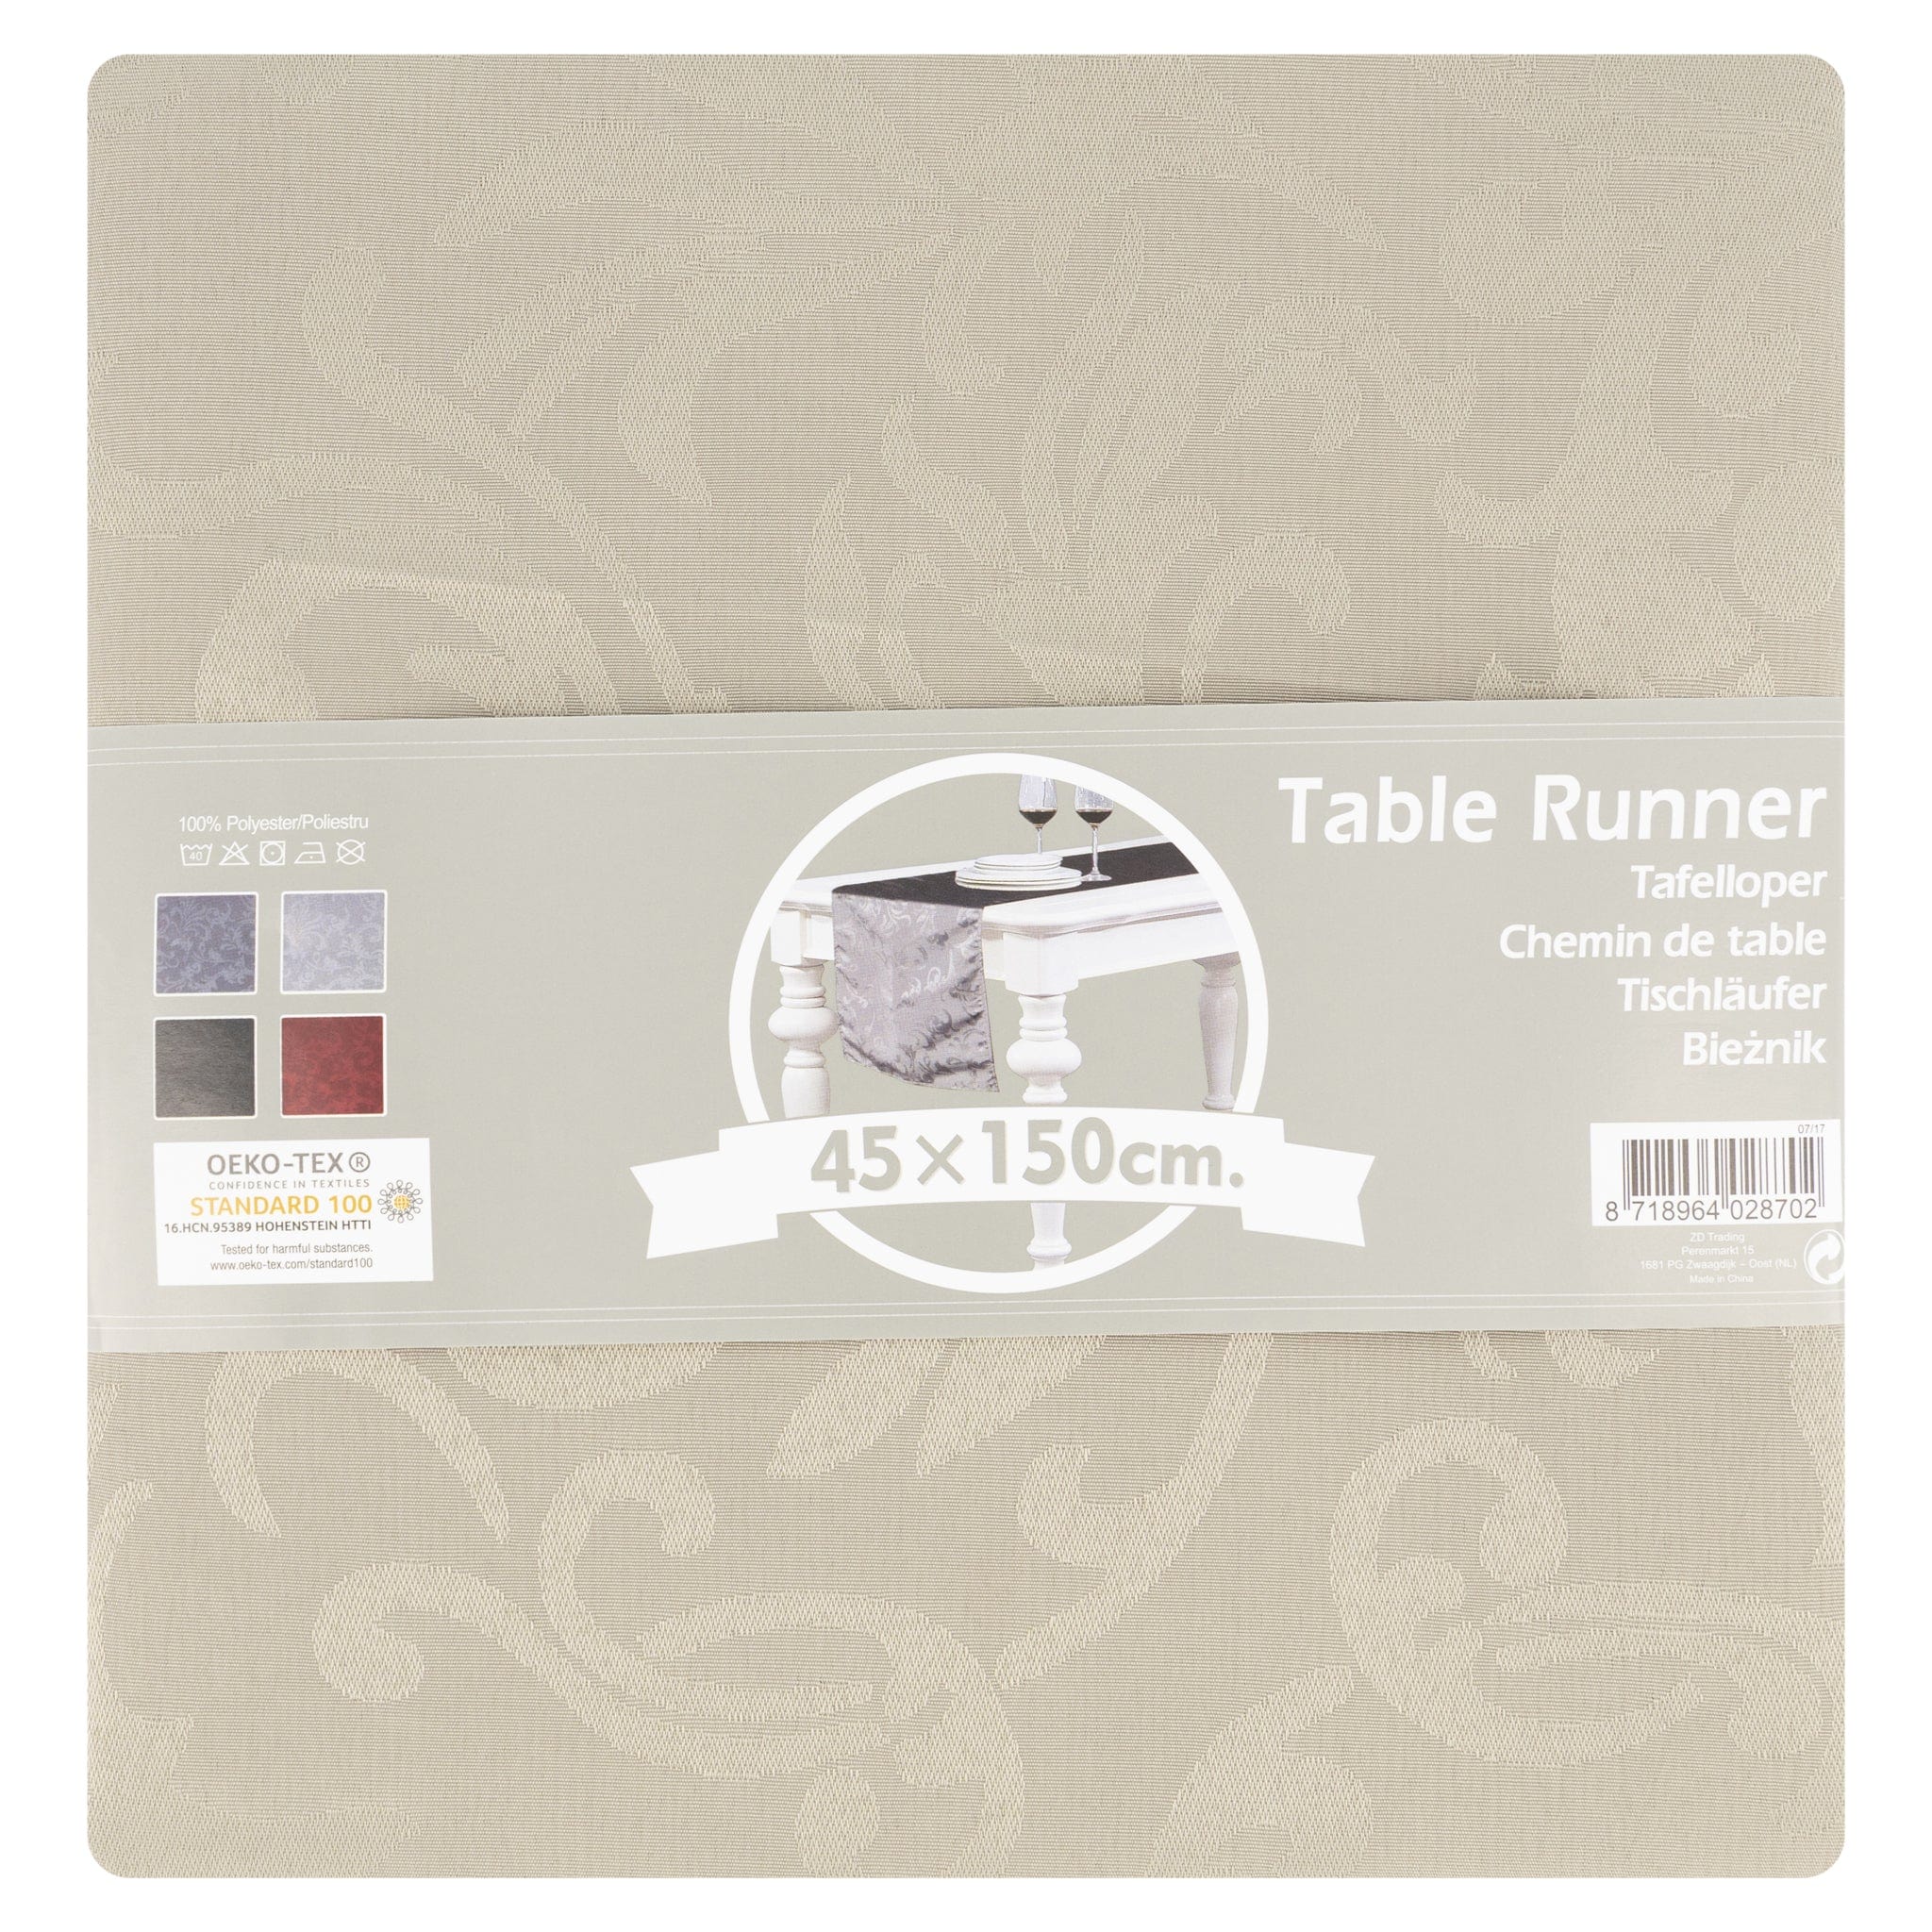 Table Runner Silver 45x150cm  *5* 8718964028702 only5pounds-com